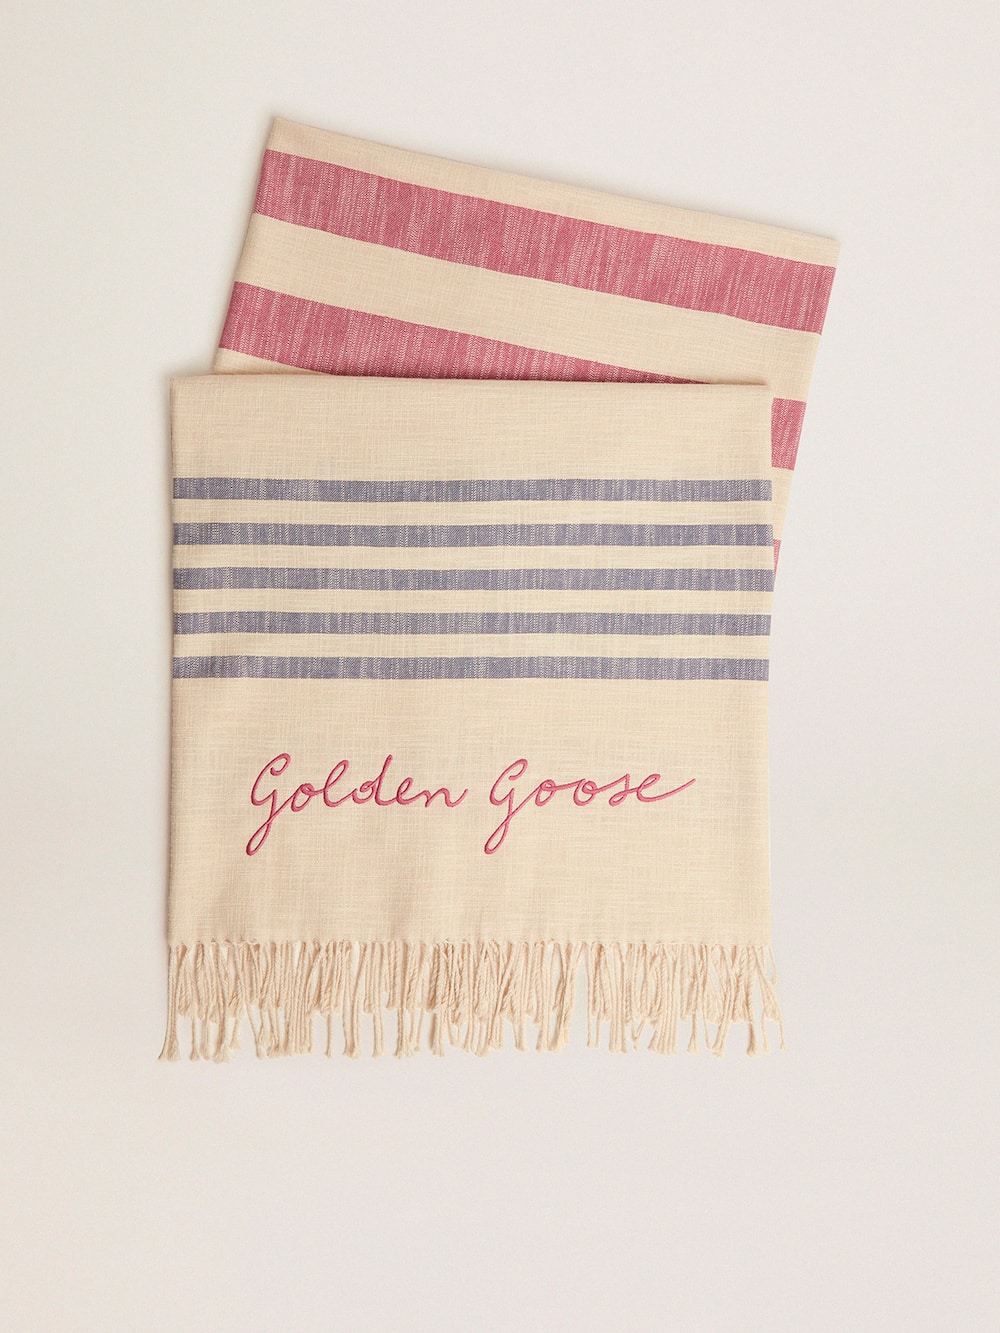 Golden Goose - Egeo Golden Resort Capsule Collection cotton beach towel in vintage white with red and blue stripes and braided fringes at the bottom in 